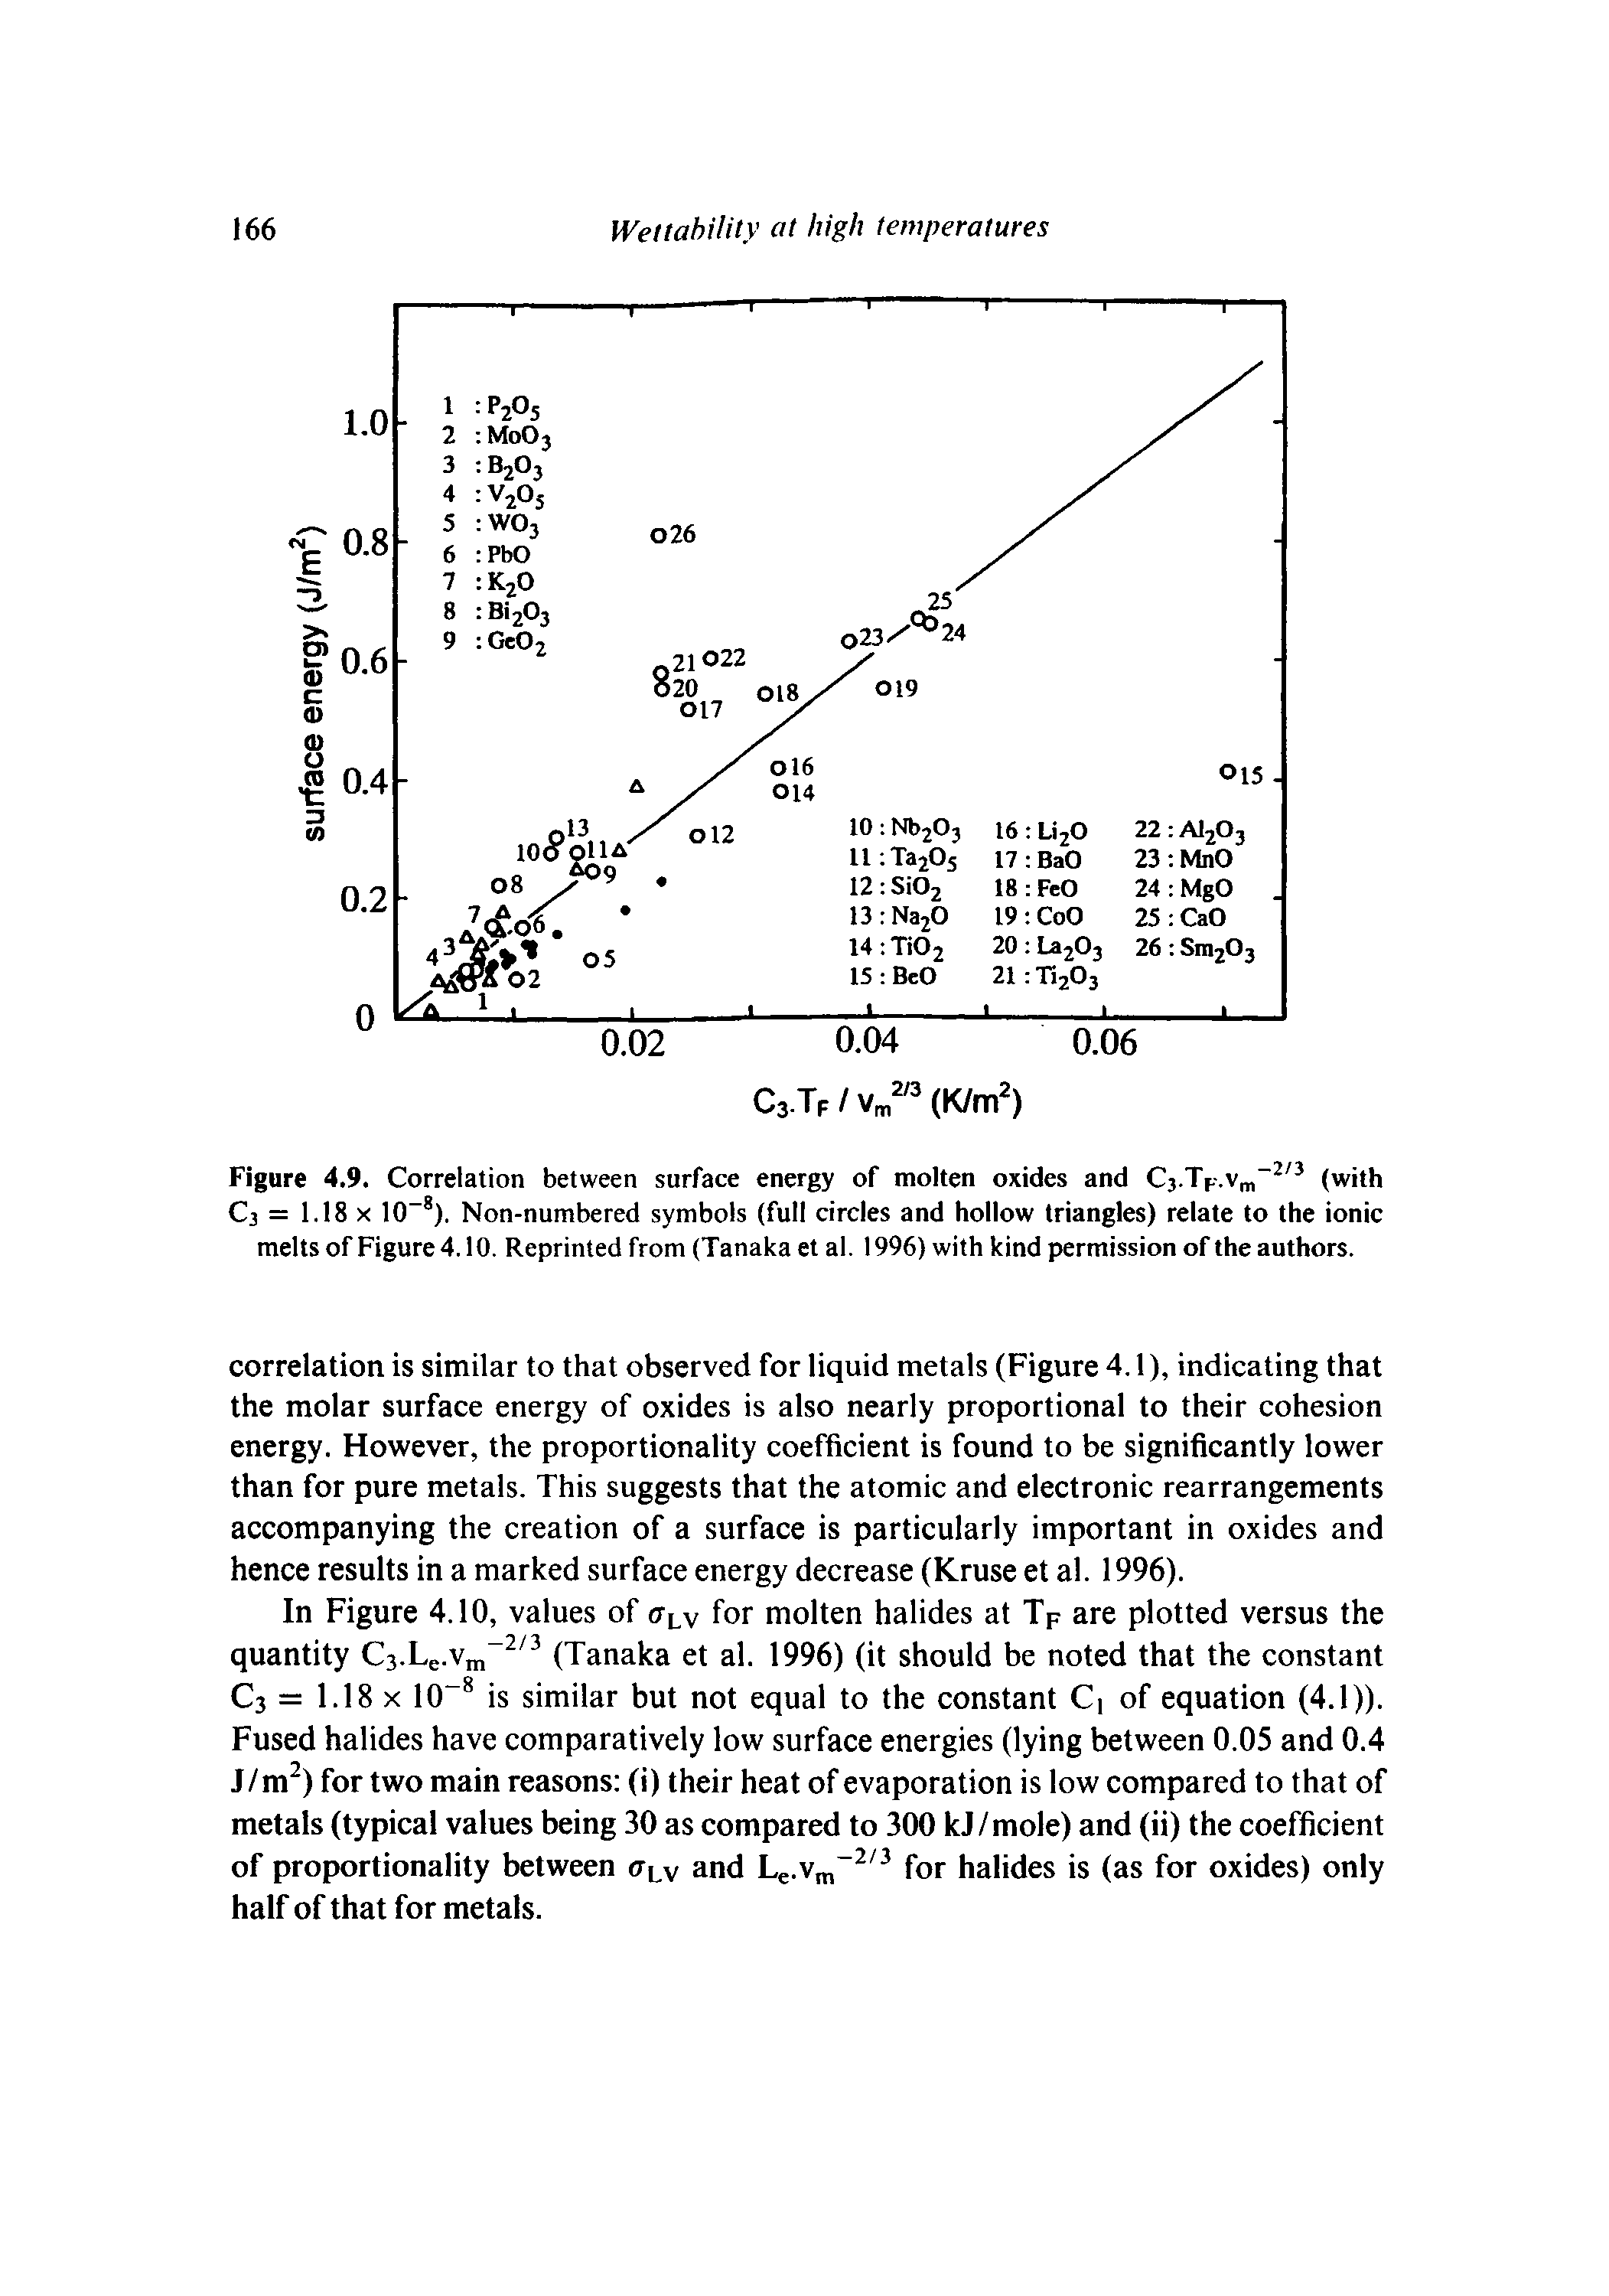 Figure 4.9. Correlation between surface energy of molten oxides and C3.TF.vm 2/3 (with Cj = 1.18 x 10-8). Non-numbered symbols (full circles and hollow triangles) relate to the ionic melts of Figure 4.10. Reprinted from (Tanaka et al. 1996) with kind permission of the authors.